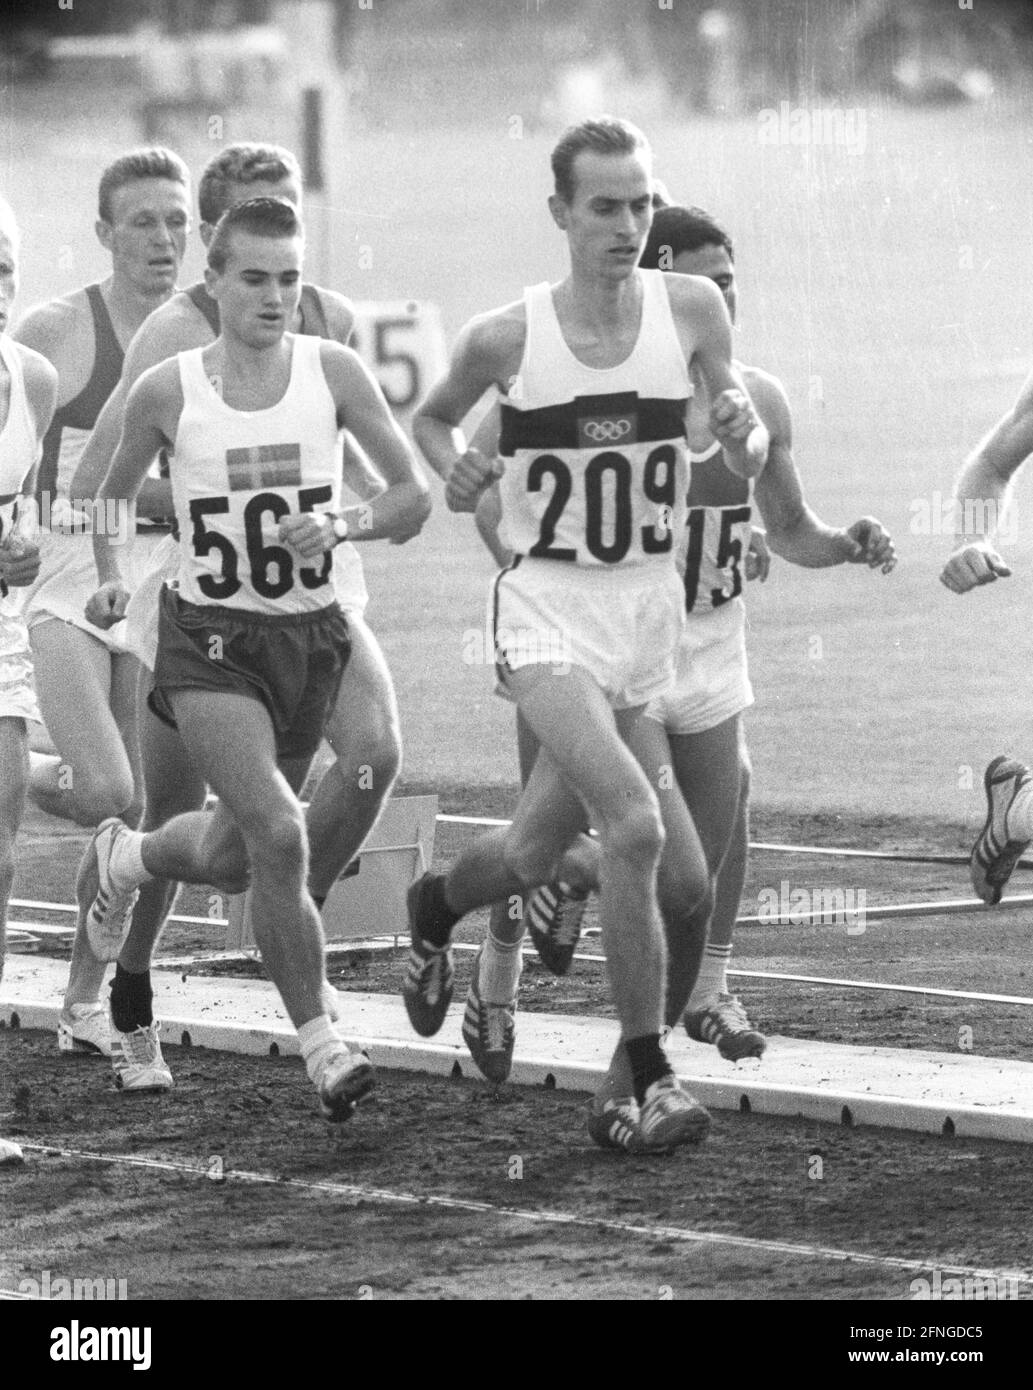 Summer Olympic Games in Tokyo 1964. Athletics: Field of runners in the 5000m race. 209= Harald Norpoth (Germany) Rec. 16.10.1964. [automated translation] Stock Photo